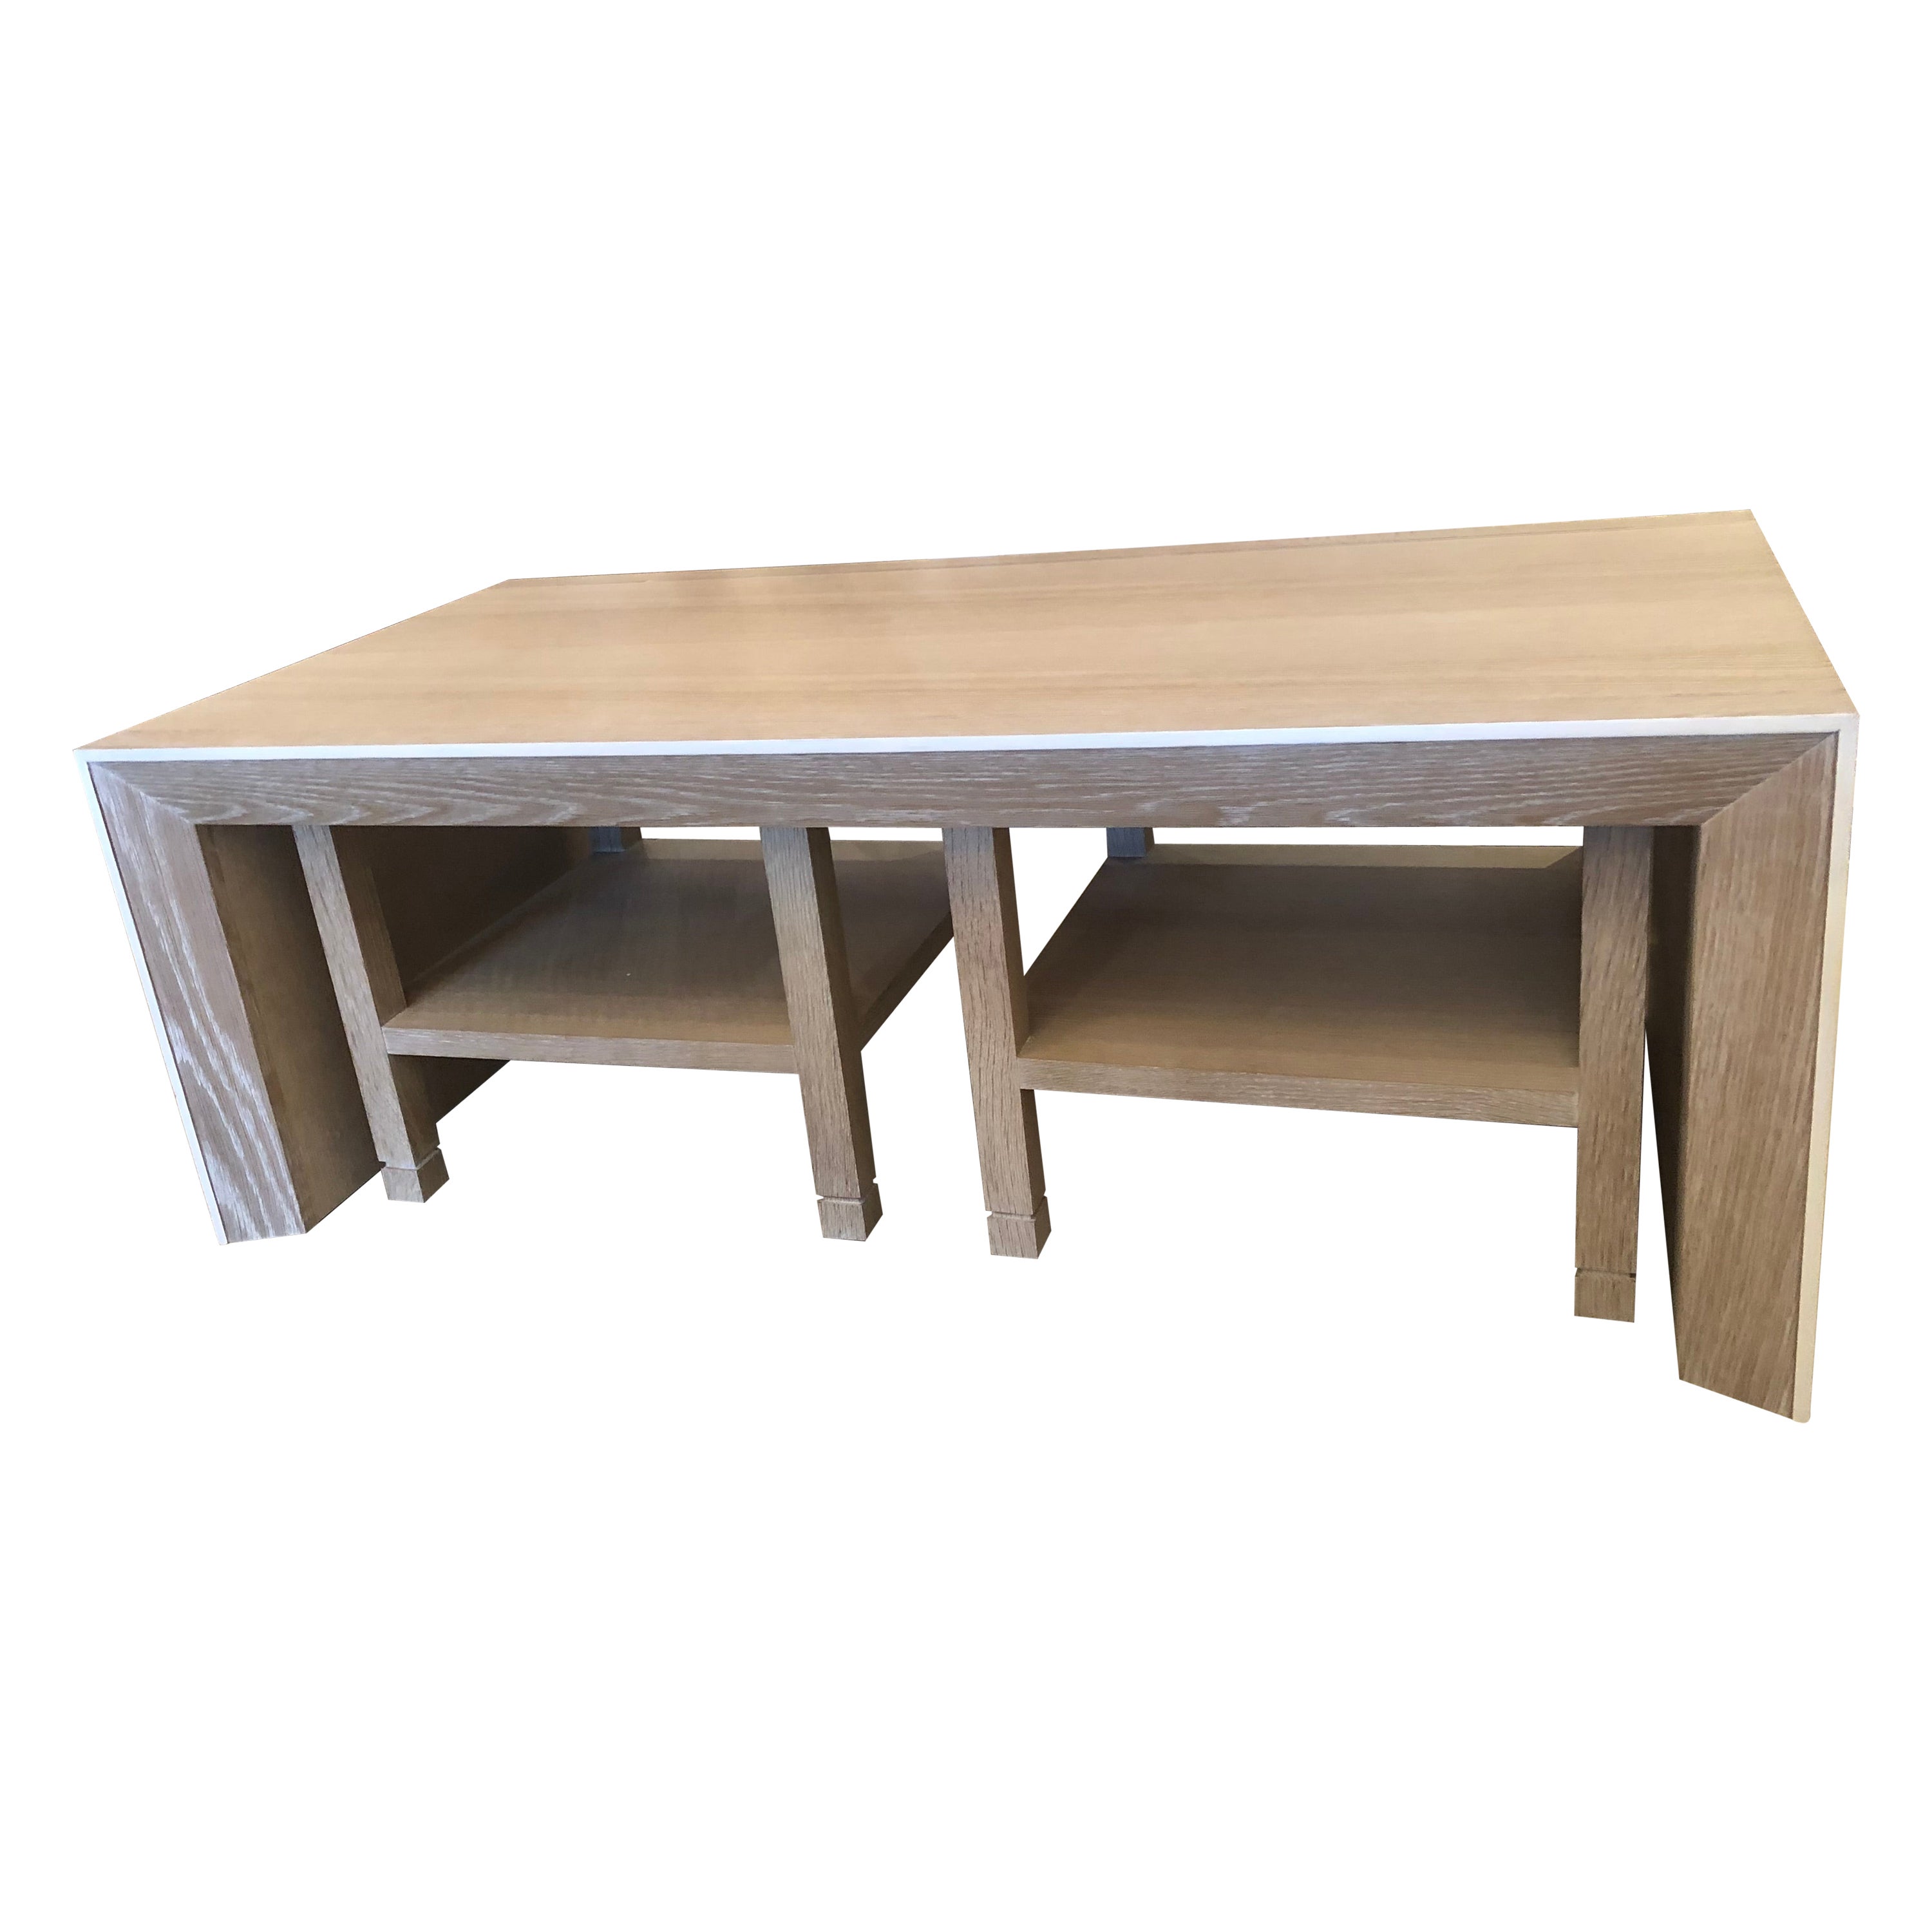 Sophisticated Cerused Wood Rectangular Coffee Table with Matching End Tables For Sale